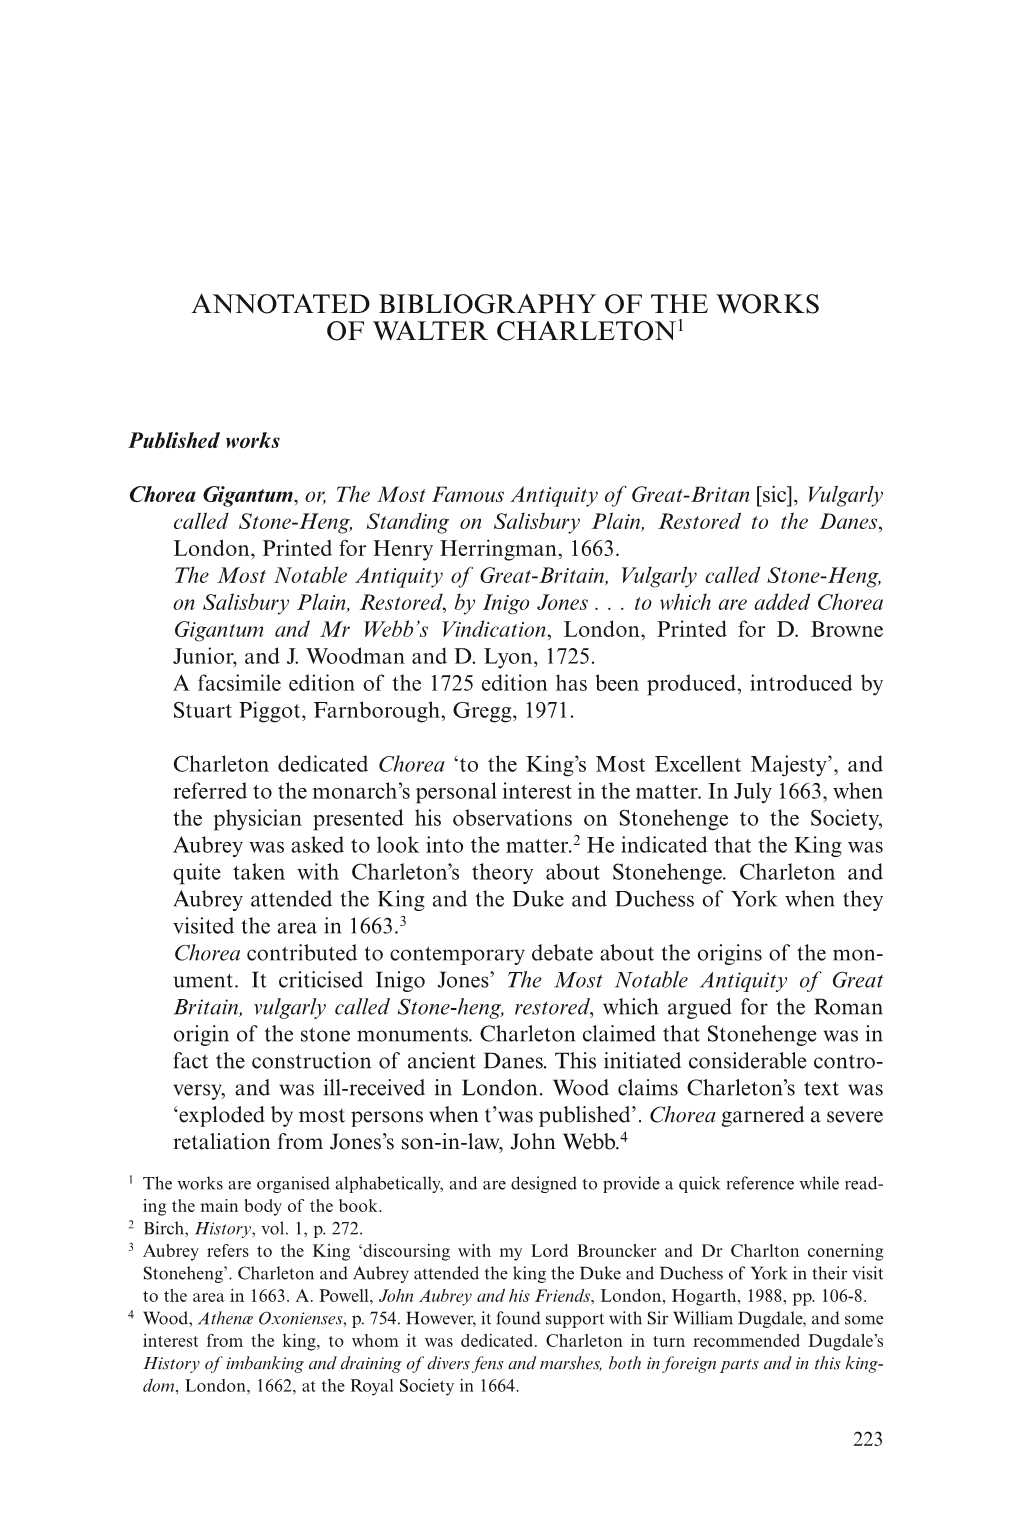 Annotated Bibliography of the Works of Walter Charleton1